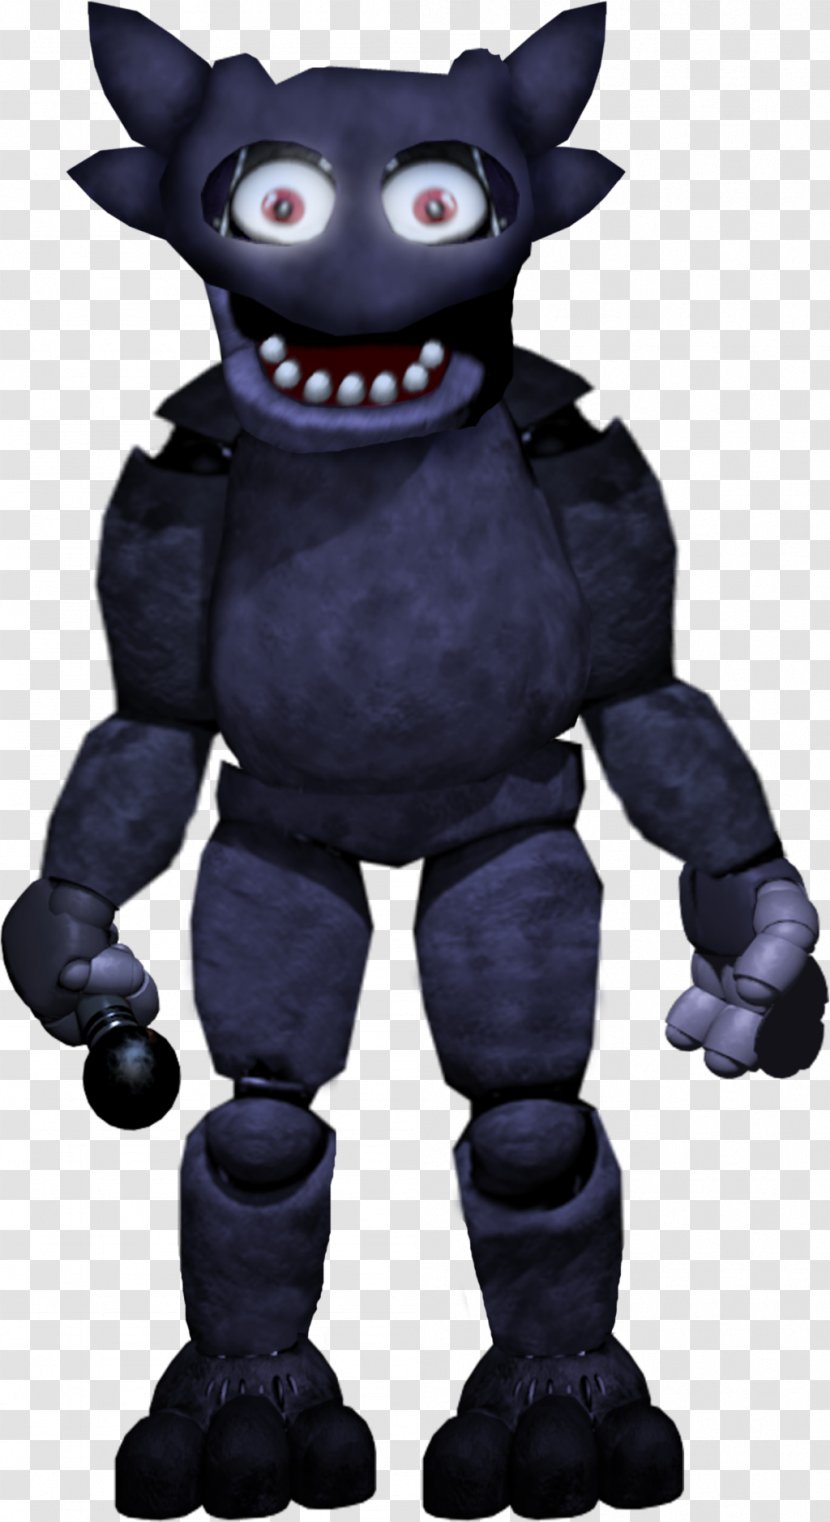 Freddy Fazbear's Pizzeria Simulator Five Nights At Freddy's 4 2 Freddy's: Sister Location 3 - Mythical Creature - My World 2.0 Transparent PNG